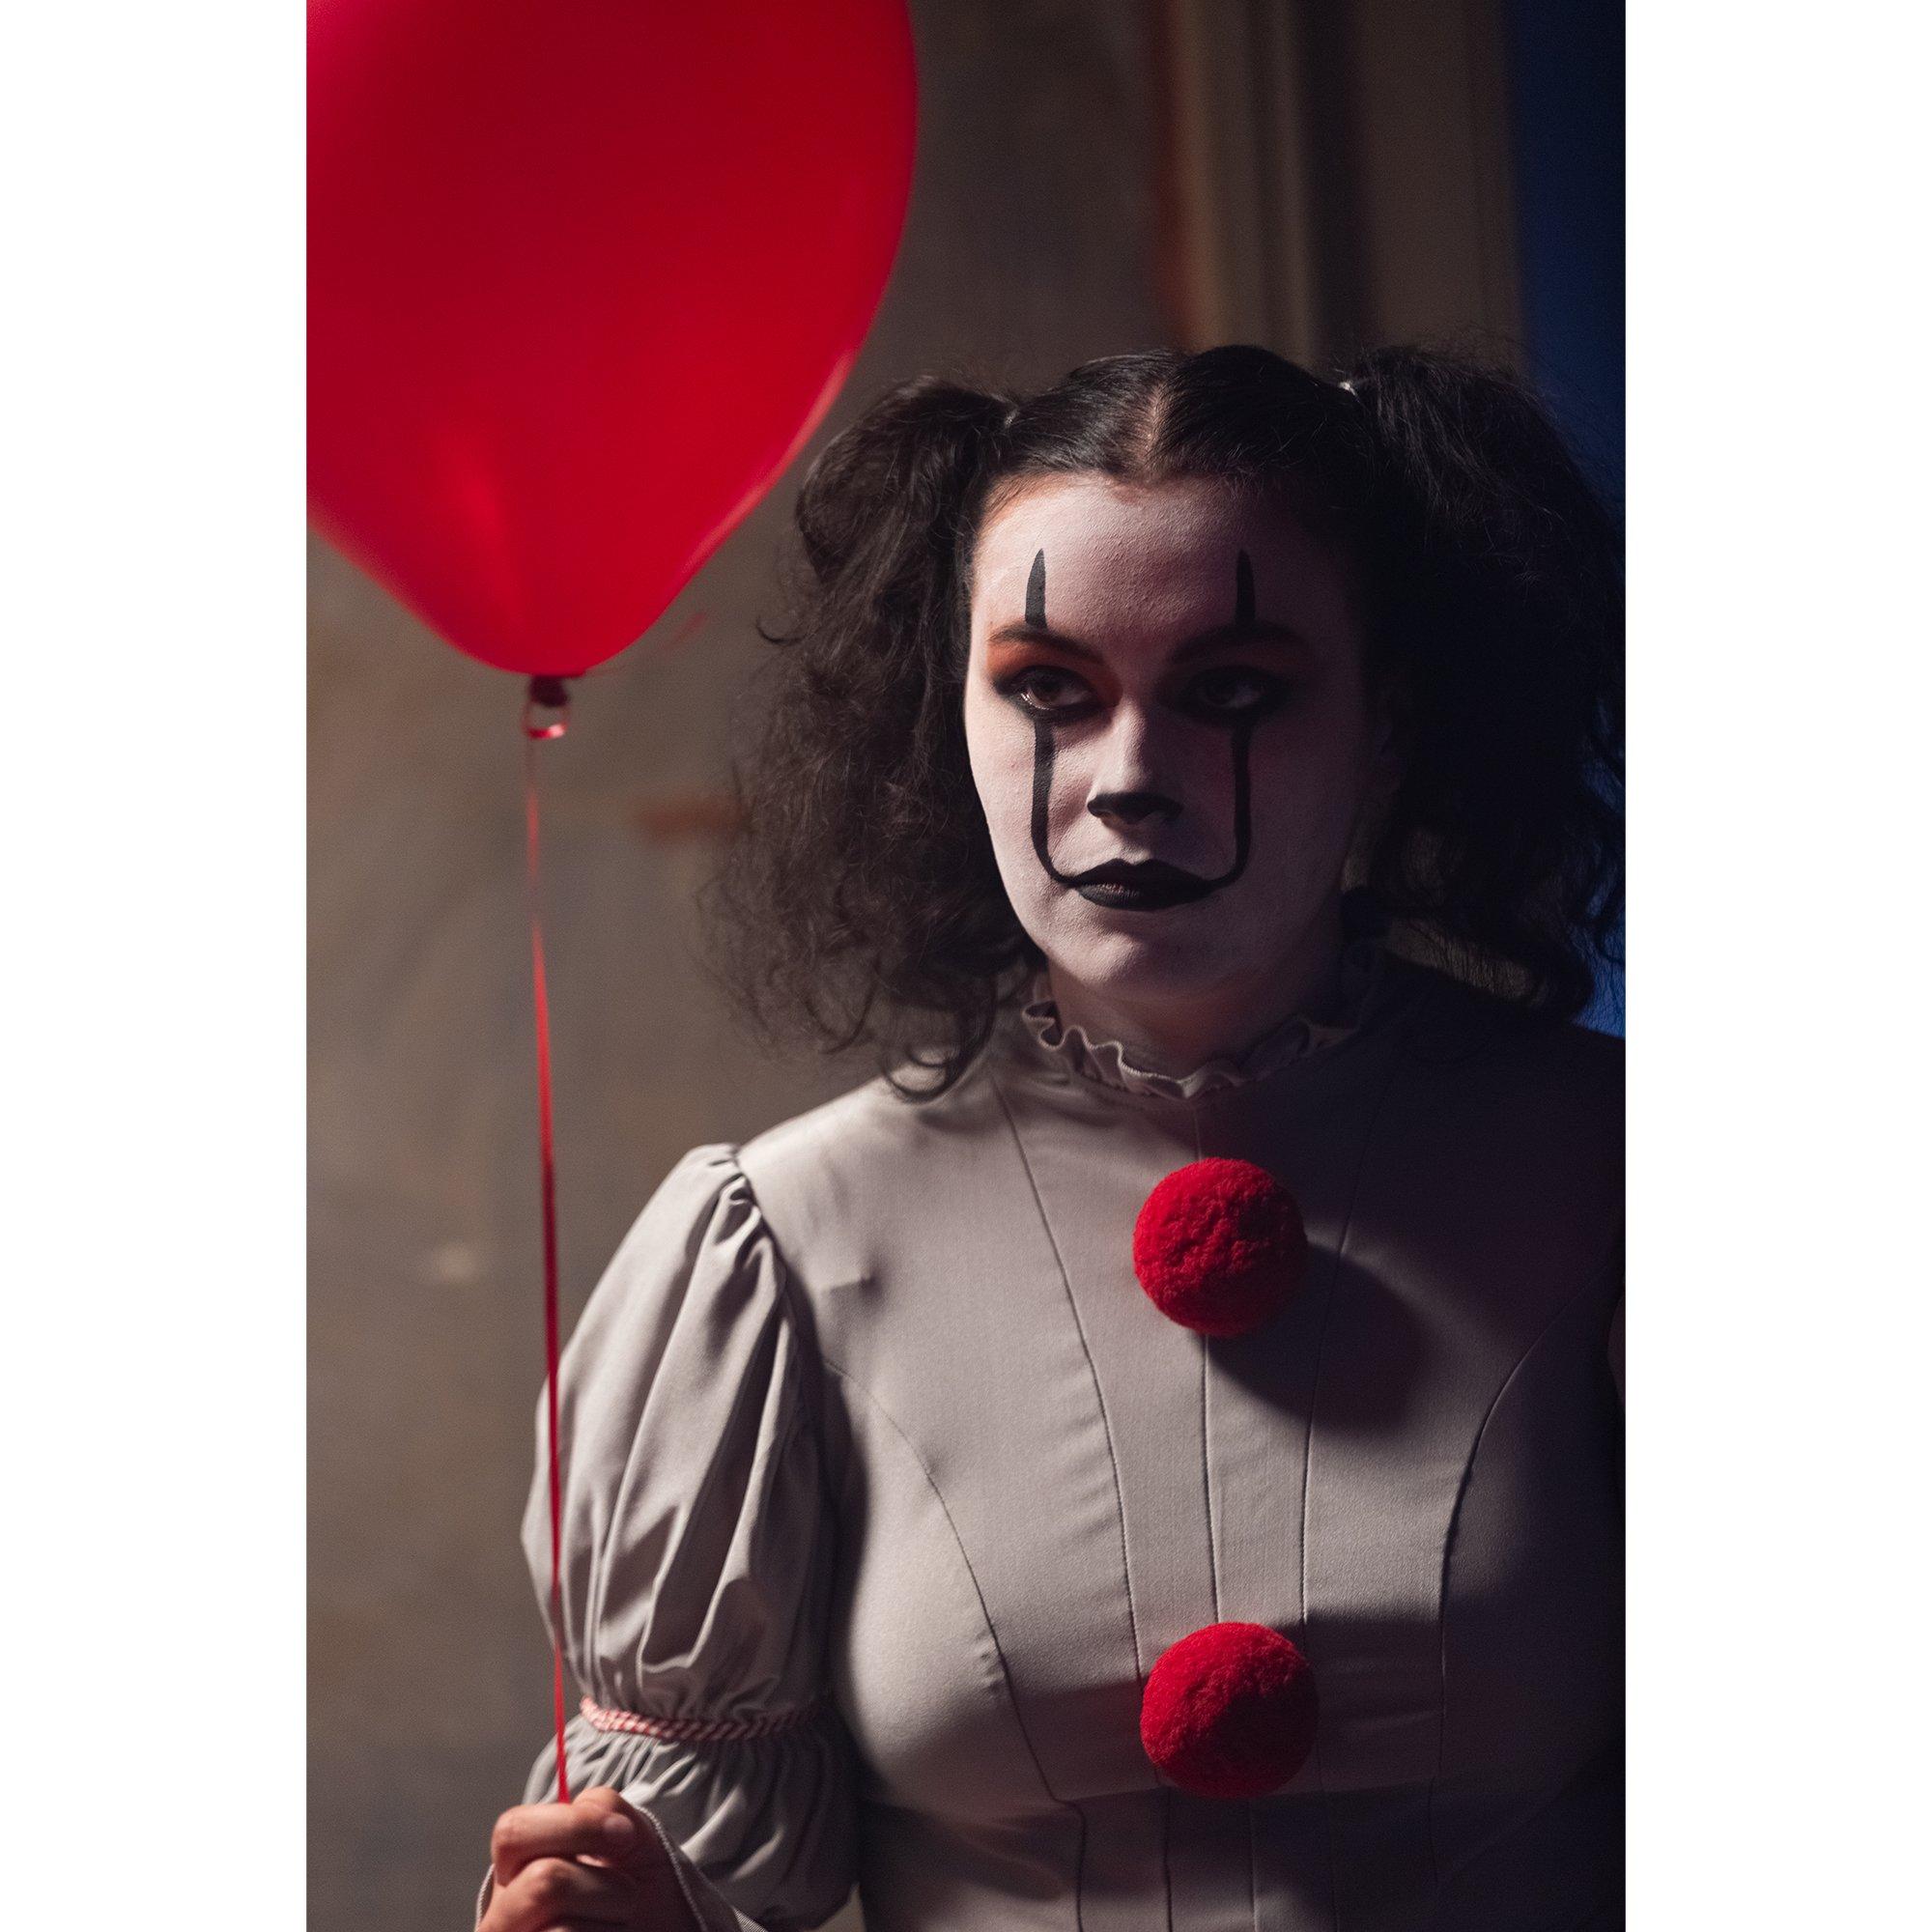 Adult Pennywise Costume - It Chapter Two